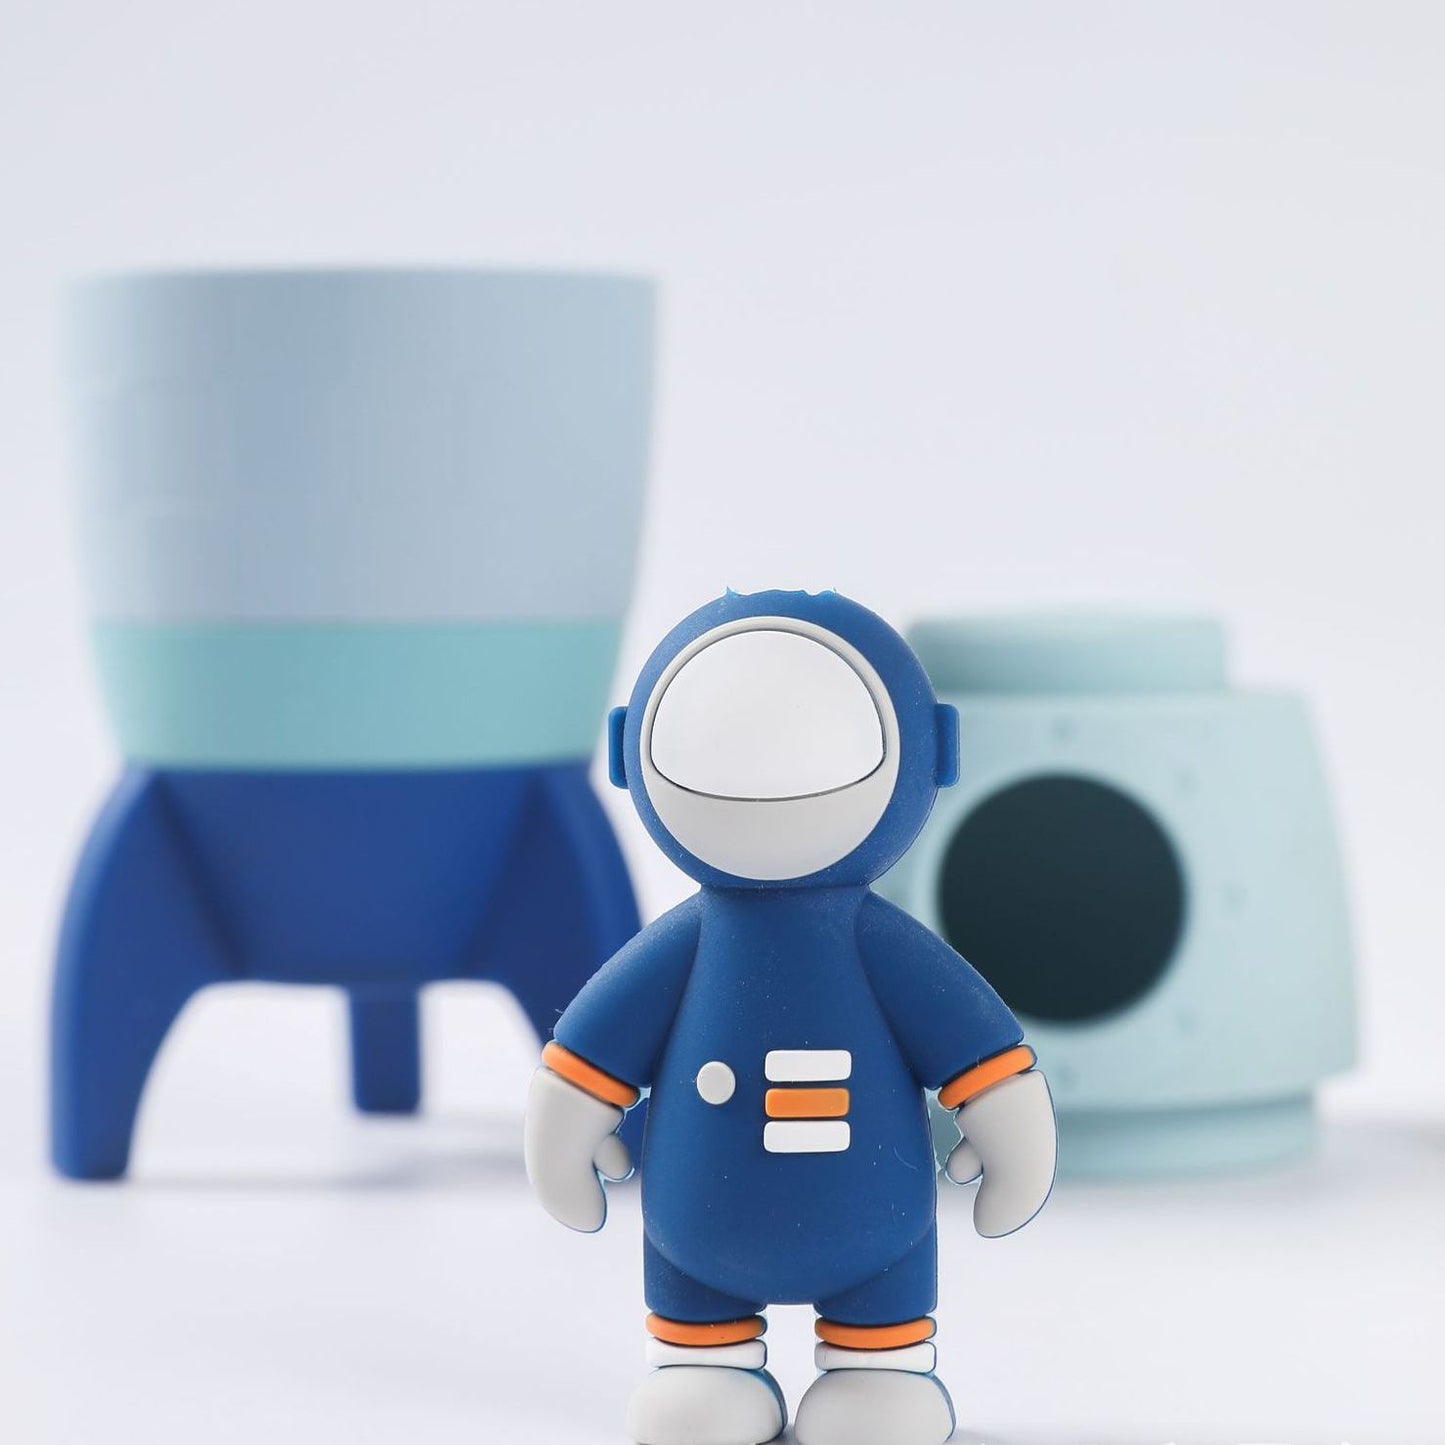 Food Grade Silicone Rocket, Astronaut Pretend Play. Safe for even infant and baby